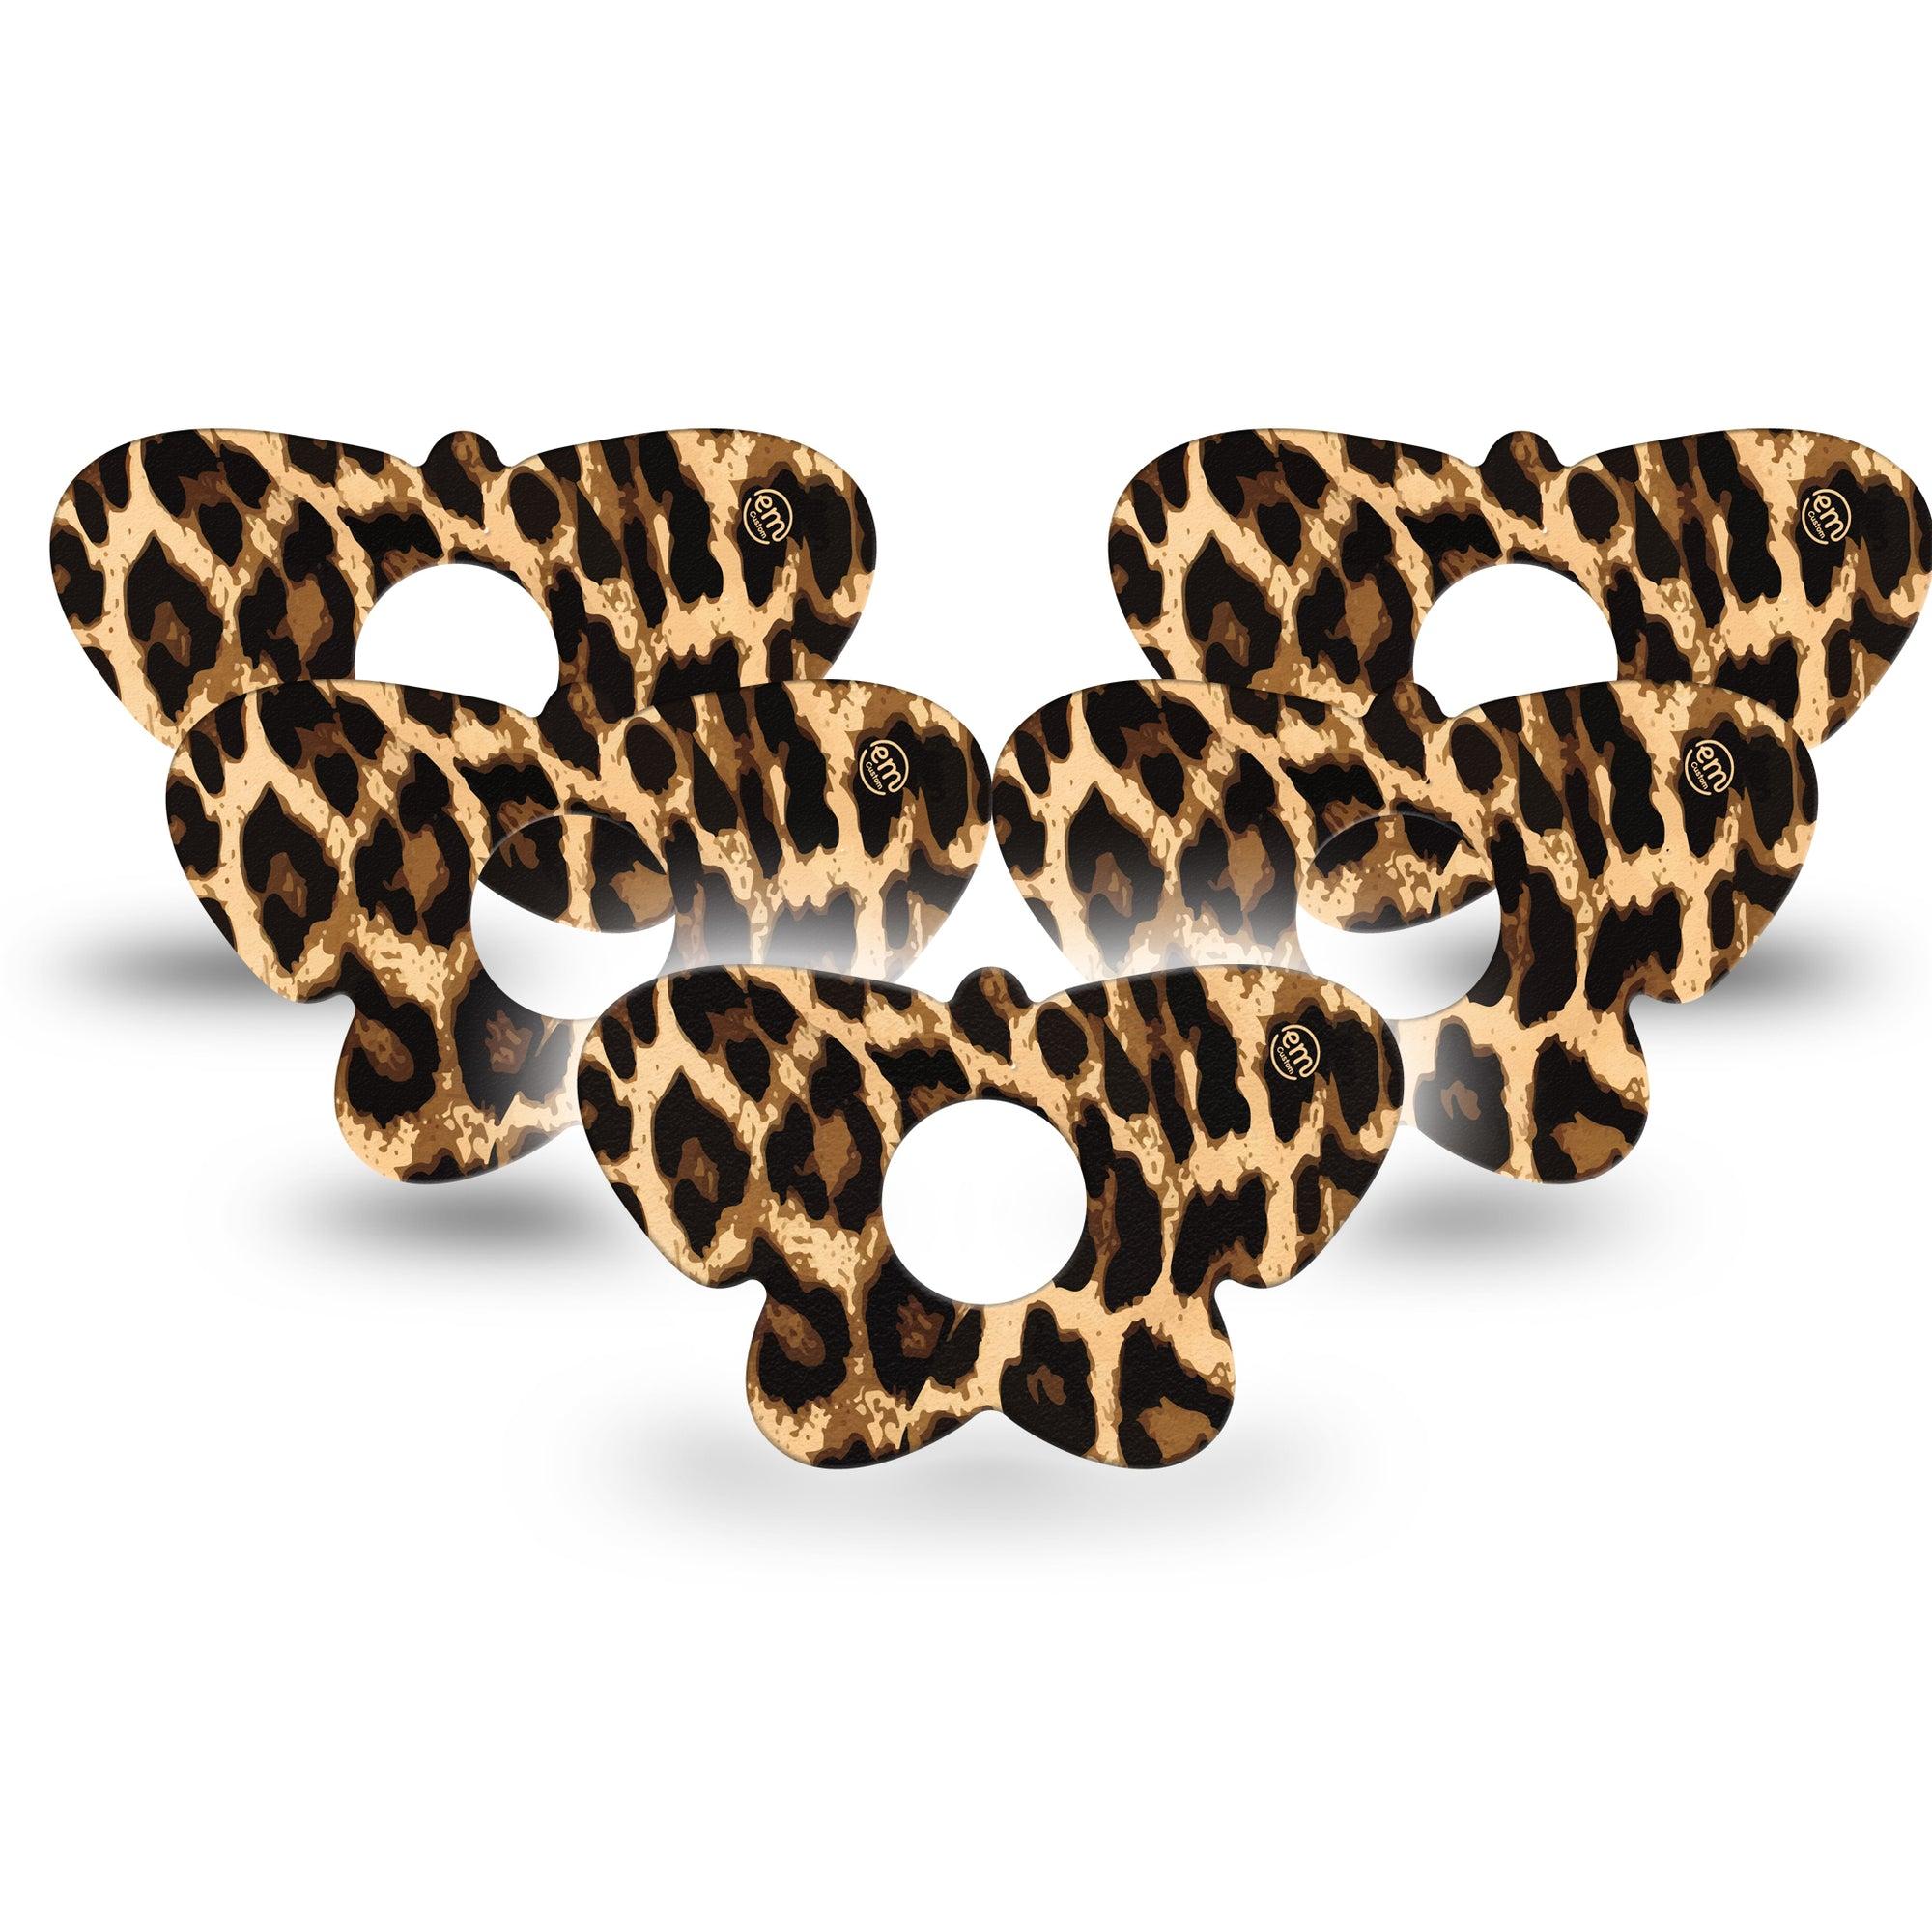 ExpressionMed Leopard Print Butterfly Libre 3 Tape, 5-Pack, Feline Animal Print Themed, CGM Plaster Patch Design